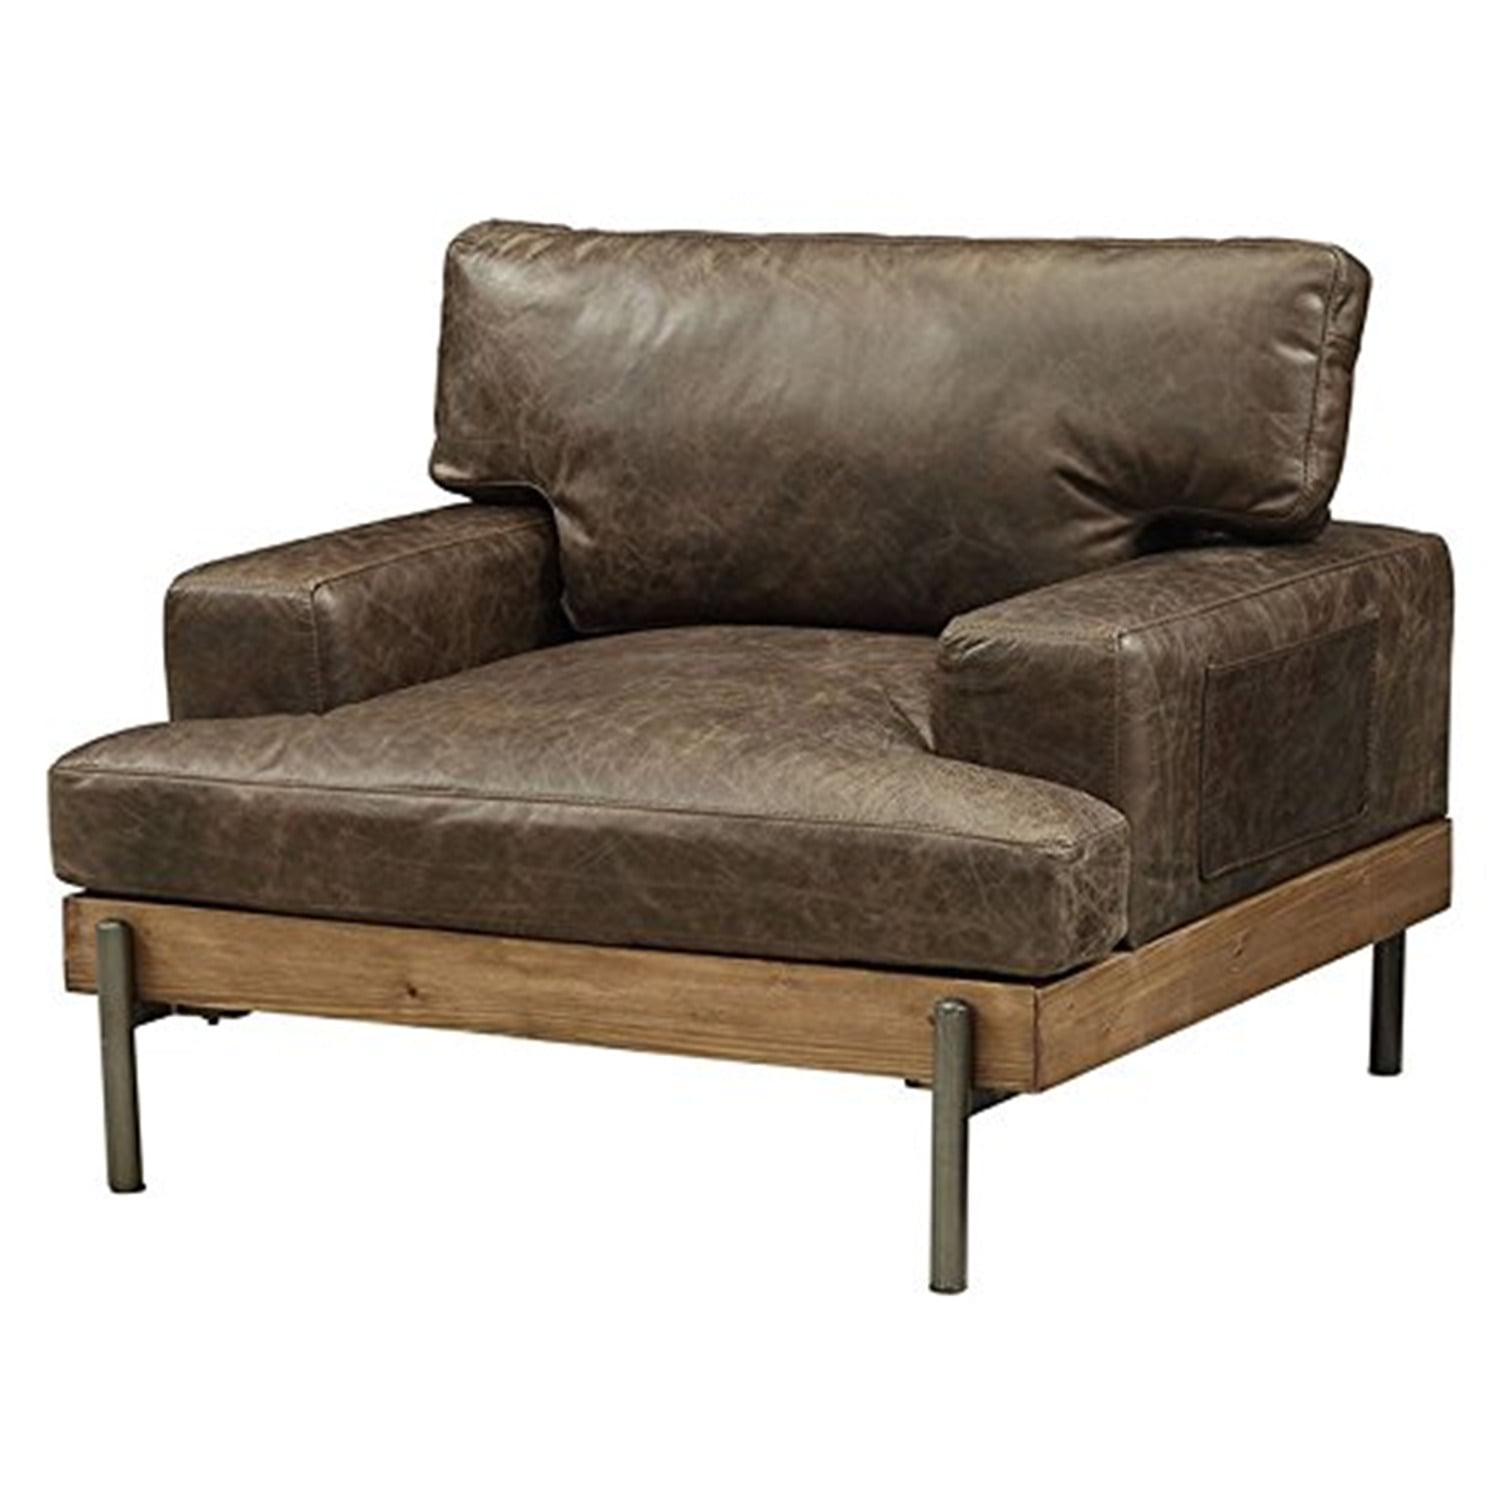 Picture of ACME 52477 Silchester Chair - Oak & Distress Chocolate Top Grain Leather - 32 x 41 x 39 in.